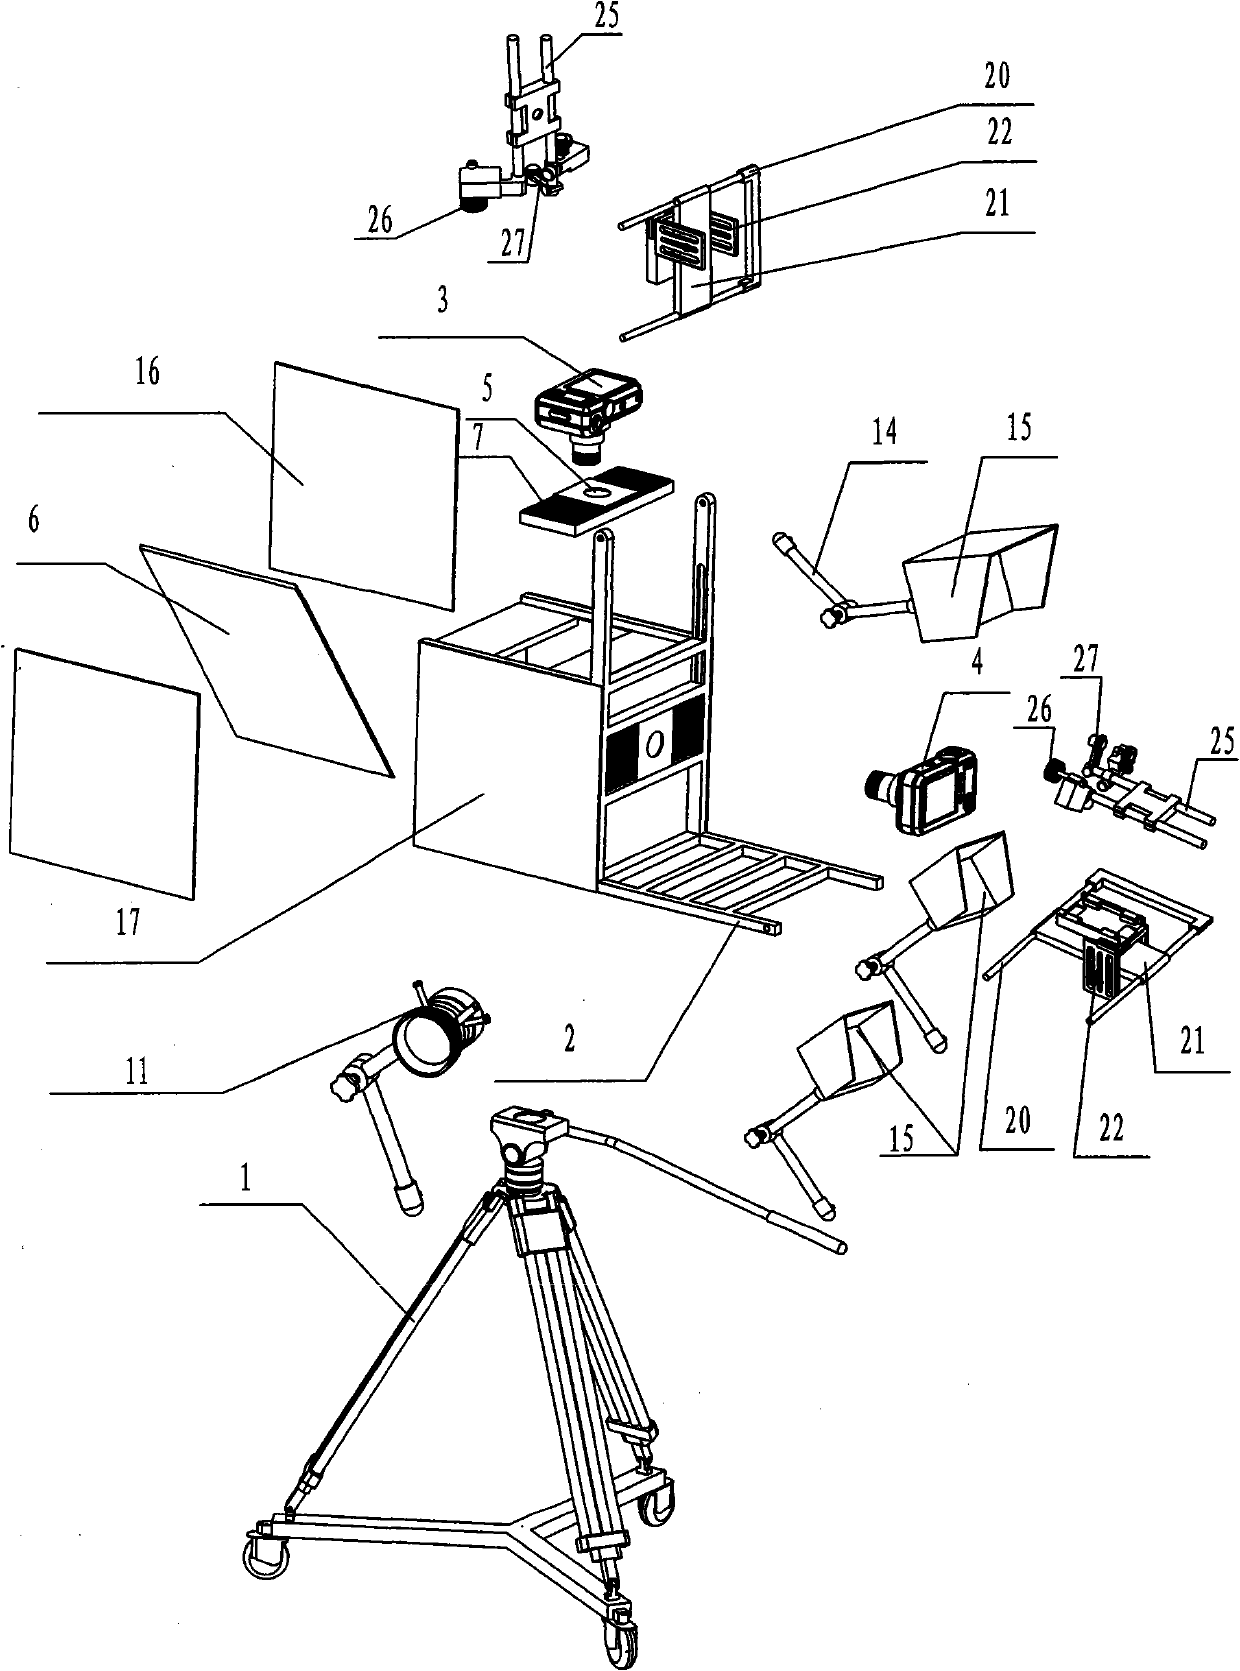 3D (Three-Dimensional) image shooting device